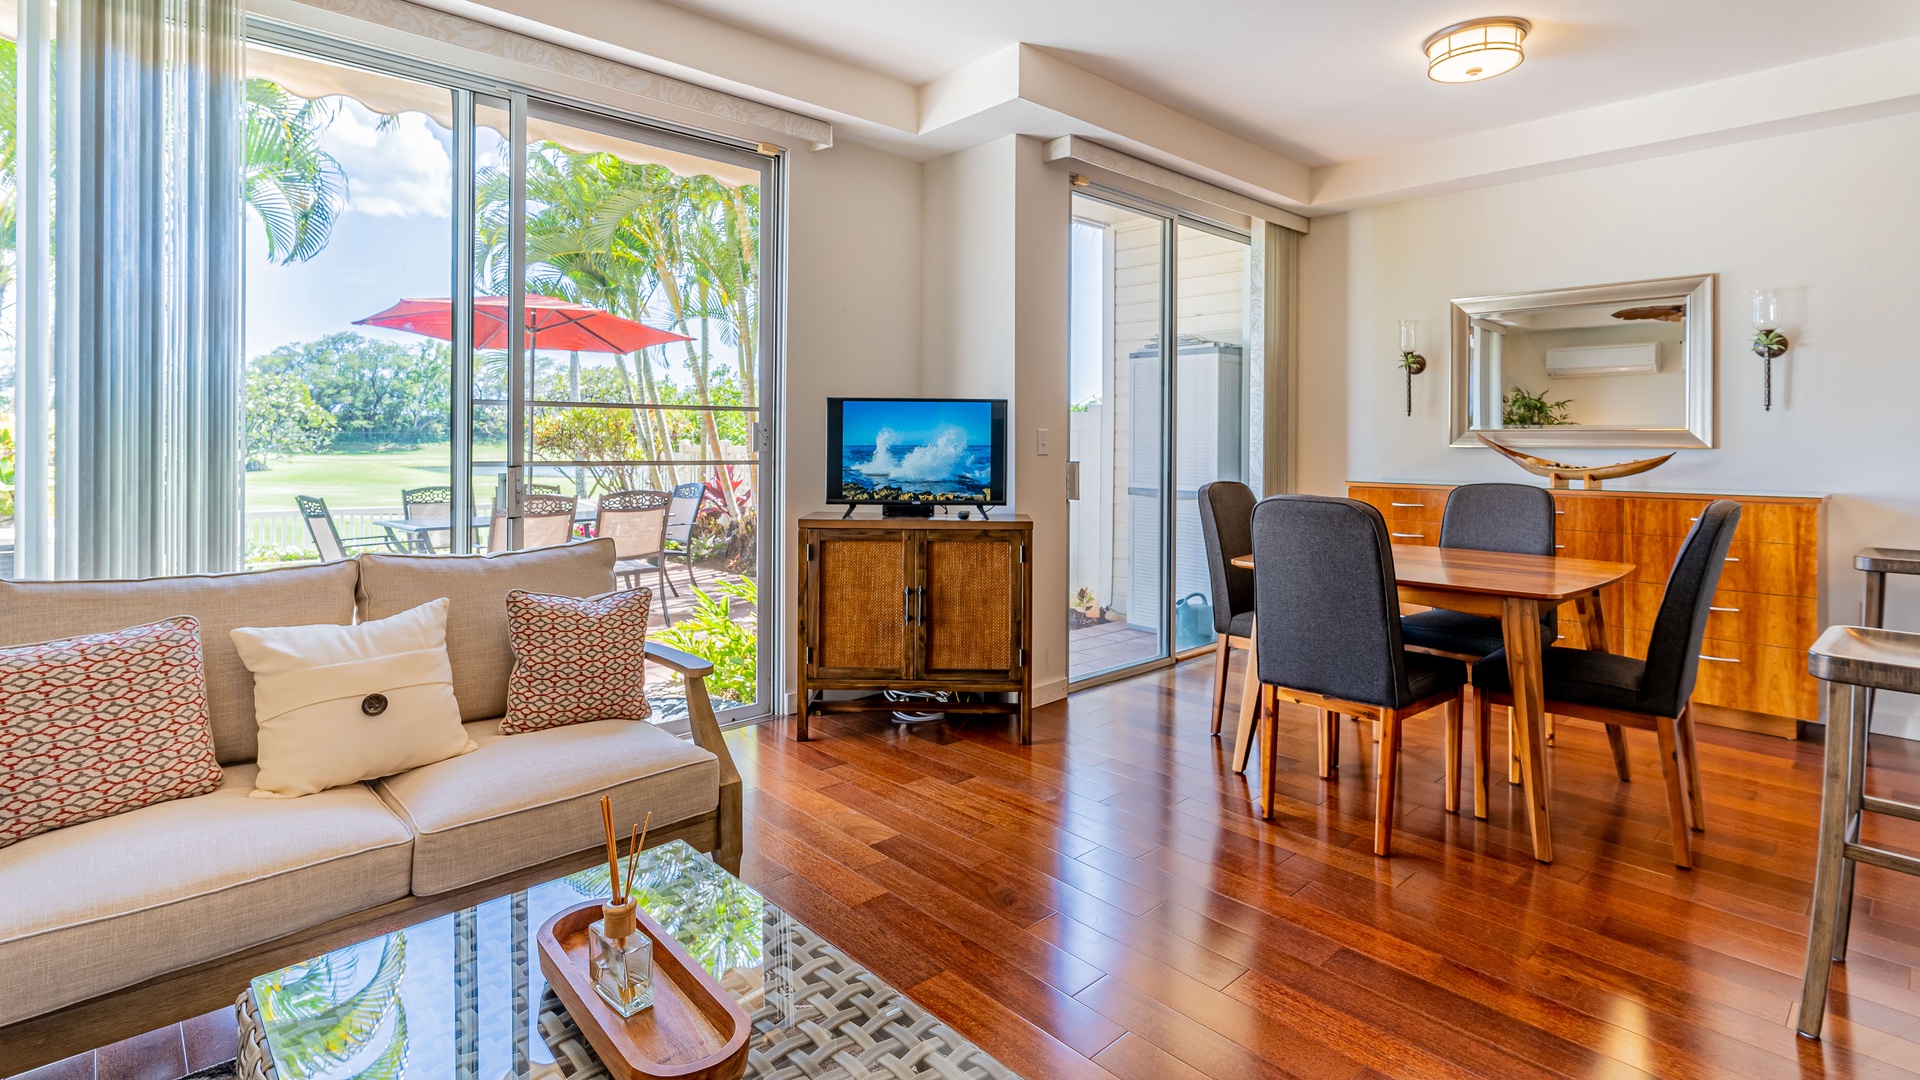 Kapolei Vacation Rentals, Fairways at Ko Olina 20G - Expansive space includes the kitchen, living and dining for entertaining.